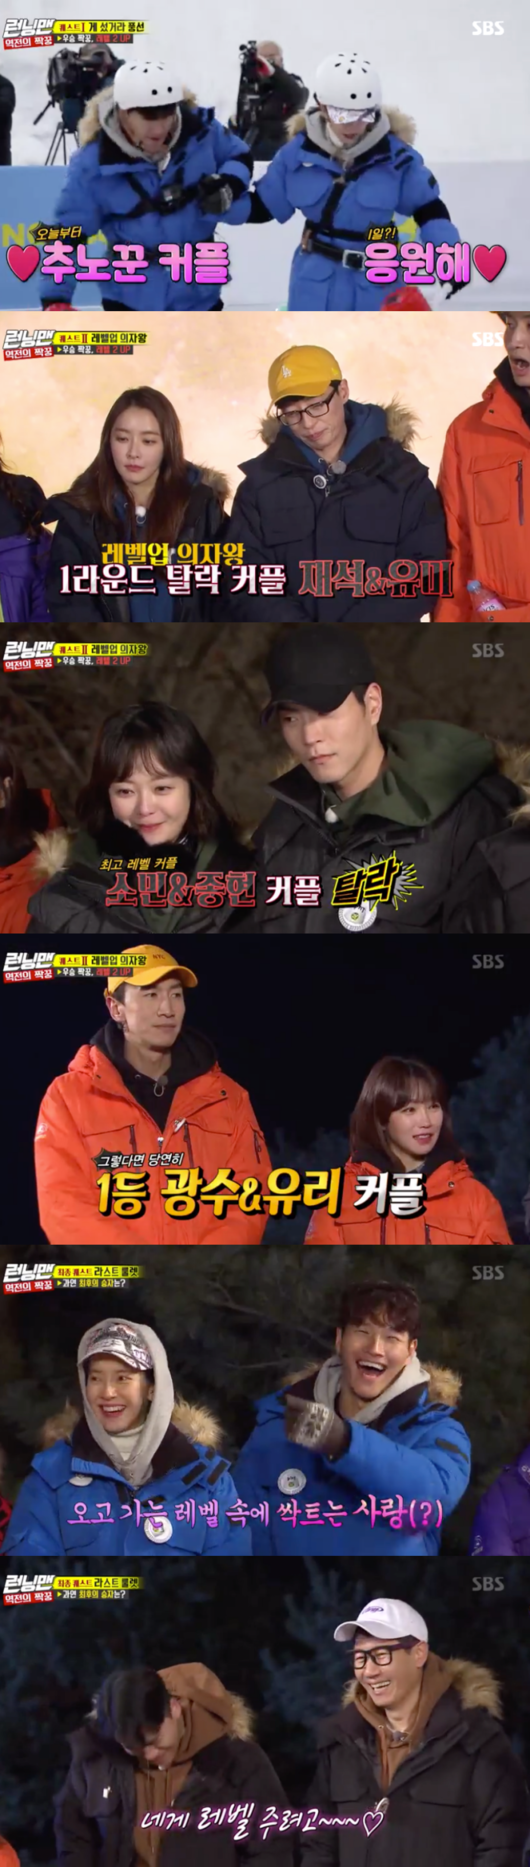 The Power Couple Who Win the Running Man.Kim Jong-kook - Song Ji-hyo has won the Running Man level-up race final after the love line.On SBS Running Man, which was broadcast on the afternoon of the 27th, level race was held following the previous confrontation.The members of Running Man decided to pair with the guest to achieve level 10.Hong Jong-Hyun, Victory, Jung Yu-mi, Lee Yoo-ri, AOA Jimin - Minah appeared.They accepted levels 4, 2, 6, 1, 5, and 3, respectively.Low-levels Yoo Jae-Suk and Lee Kwang-soo aimed for Jung Yu-mi, who started with level 6.Indeed Jung Yu-mi, a big fan of Yoo Jae-Suk, was thrilled to shake hands with Yoo Jae-Suk.When you said you were getting married, it felt like Brad Bird Pitt was getting married, he said.Kim Jong-kook said, Yoo Jae-Suk is ugly more than when Brad Bird Pete played grandfather.Before the full-scale couples decision, Jeon So-min and Hong Jong-Hyun boasted pink airflow.Hong Jong-Hyun said, I did not know before, but Mr. Somin is actually pretty.I will let Min take a picture of my sister today. Jeon So-min made a three-way poem, and Jeon So-min also said, Hong Hong Hong Hong.My heart toward Jong-hyun is on the way, he replied in the third act of Hong Jong-Hyun. Eventually, they formed a couple.Jung Yu-mi, a level 6, said he hoped his partner would be full of power, so the members had a great battle with the water cup.As a fan, he was paired with Yoo Jae-Suk, and Kim Jong-kook also wanted a true confrontation of female members.The members joined together to make Song Ji-hyo, who was tied up with Kimbap couple during the opening, a partner of Kim Jong-kook, and they also became a couple.As a result of the fierce couples decision, Kim Jong-kook - Song Ji-hyo, Yoo Jae-Suk - Jung Yu-mi, Jeon So-min - Hong Jong-Hyun, Yang Se-chan - Jimin completed the high-level team.Ji Suk-jin - Victory, Haha - Minah, Lee Kwang-soo - Lee Yoo-ri was aiming for a band electrode because they were low level even if they combined.These seven teams had to reach level 10 through the second round to win the championship.The first couple Game is a couple chase game on the ice, Blood.Yoo Jae-Suk - Jung Yu-mi, Lee Kwang-soo - Lee Yoo-ri, Kim Jong-kook - Song Ji-hyo, Yang Se-chan - Jimin reached the semi-finals.After twists and turns, Lee Kwang-soo - Lee Yoo-ri, Kim Jong-kook - Song Ji-hyo team reached the final, but Kim Jong-kook - Song Ji-hyo team, who had already exhausted their physical strength in the semi-finals, was caught.But Lee Kwang-soo laughed because he couldnt easily burst the balloon.Lee Kwang-soo, who added level 2, liked it, saying it was level 2 at level 0; Kim Jong-kook, who was second, conceded level 1 to Song Ji-hyo.The members named Kim Jong-kook and Song Ji-hyo as the couple of Kimbap couple.Whenever they played Game, they continued to sing recollection and man. When Kim Jong-kook conceded to the level, the pink light grew even more intense.The second round was the Level-Up Chair King Race.The Hong Jong-Hyun - Jeon So-min team and Yang Se-chan - Jimin team, who are aiming for the first chair, fought.Thanks to these, Ji Suk-jin - Victory, Kim Jong-kook - Song Ji-hyo took the chair comfortably even though it was late.Lee Yoo-ri, who ran to find the second chair, burned the game to the point of subtracting the insole.In the first showdown, the Yoo Jae-Suk - Jung Yu-mi couple were the first to be eliminated; the survival teams vote resulted in Ji Suk-jin - victory becoming the captain couple.The captain couple could drop a couple, who remembered the chair where the high level, Jeon So-min - Hong Jong-Hyun, sat and dropped them.Now the remaining four teams have relaunched the chair race.Lee Yoo-ri let out a pity villain force, knocking out the Haha - Minah couple.Yang Se-chan - Jimin couple who became a captain couple named Kim Jong-kook - Song Ji-hyo couple as dropouts.But Yang Se-chan - a Jimin couple who were eliminated from the third game took the authority to decide the final number one.They gave Lee Kwang-soo - Lee Yoo-ri a first-place finish and a level-up.But all seven teams failed to reach level 10; eventually the final ranking was set as the final roulette; the members who took the roulettes compartment as much as they had acquired.The final number one was Kim Jong-kook - Song Ji-hyo, who was tied up as a couple all day.Haha - Those who stayed in only one room between the Minah couples names enjoyed the joy of hugging.Running Man